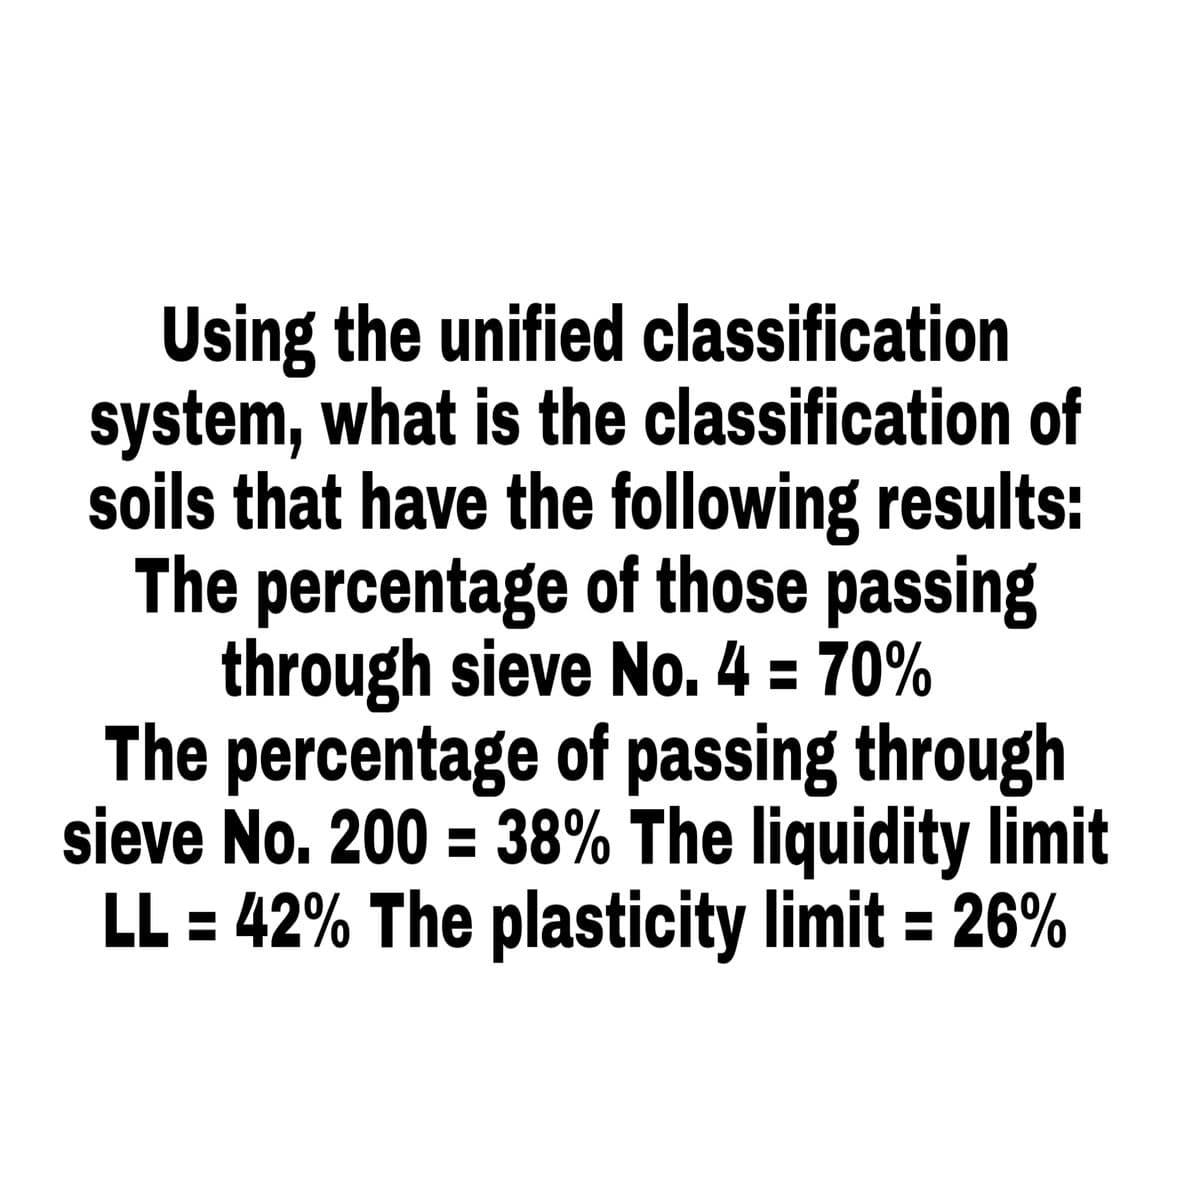 Using the unified classification
system, what is the classification of
soils that have the following results:
The percentage of those passing
through sieve No. 4 = 70%
The percentage of passing through
sieve No. 200 = 38% The liquidity limit
LL = 42% The plasticity limit = 26%
%3D
%3D
%3D
%3D
